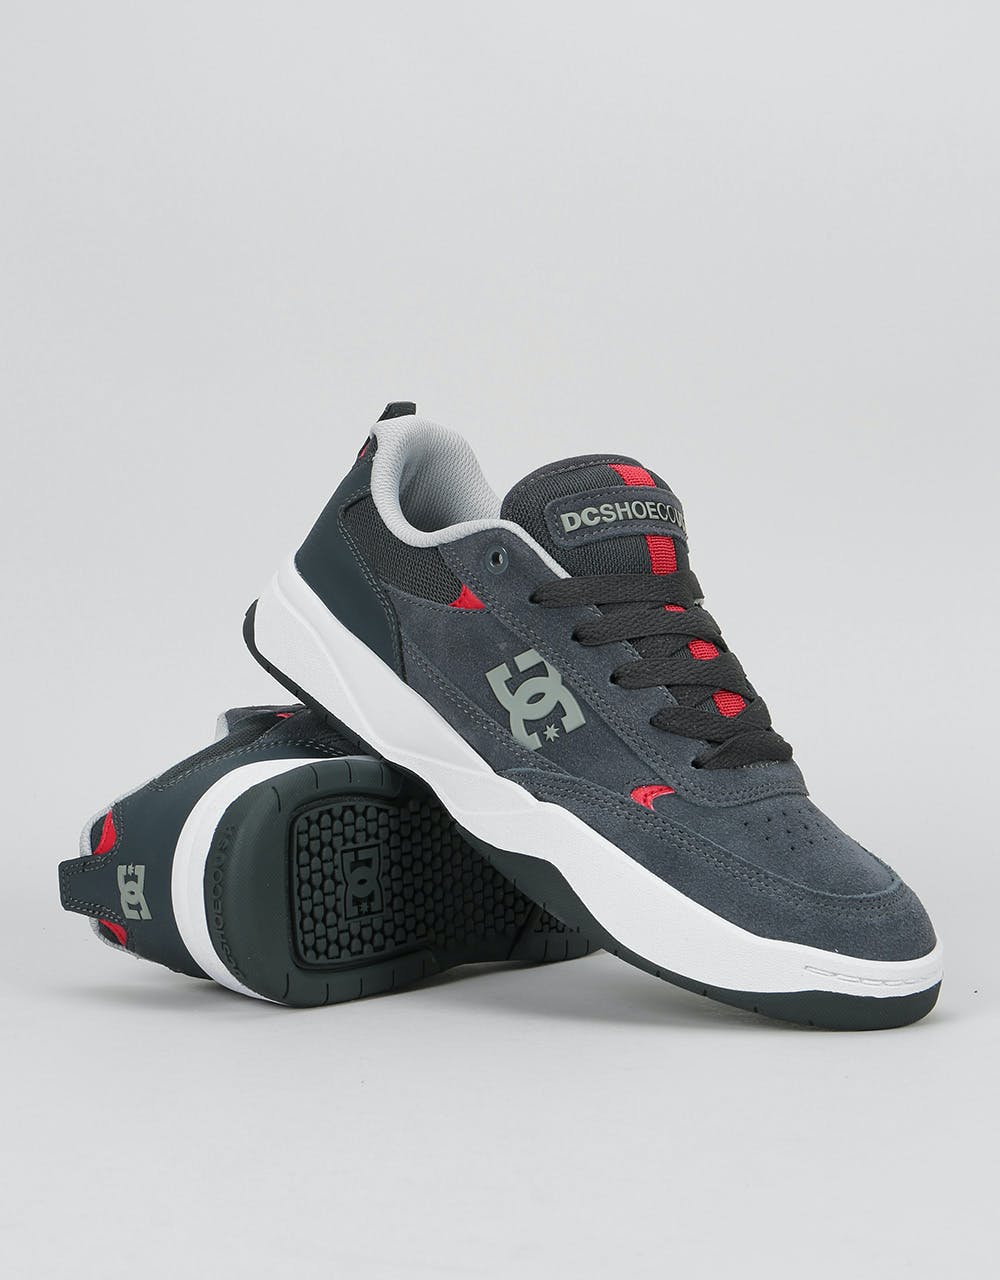 DC Penza Skate Shoes - Grey/Grey/Red